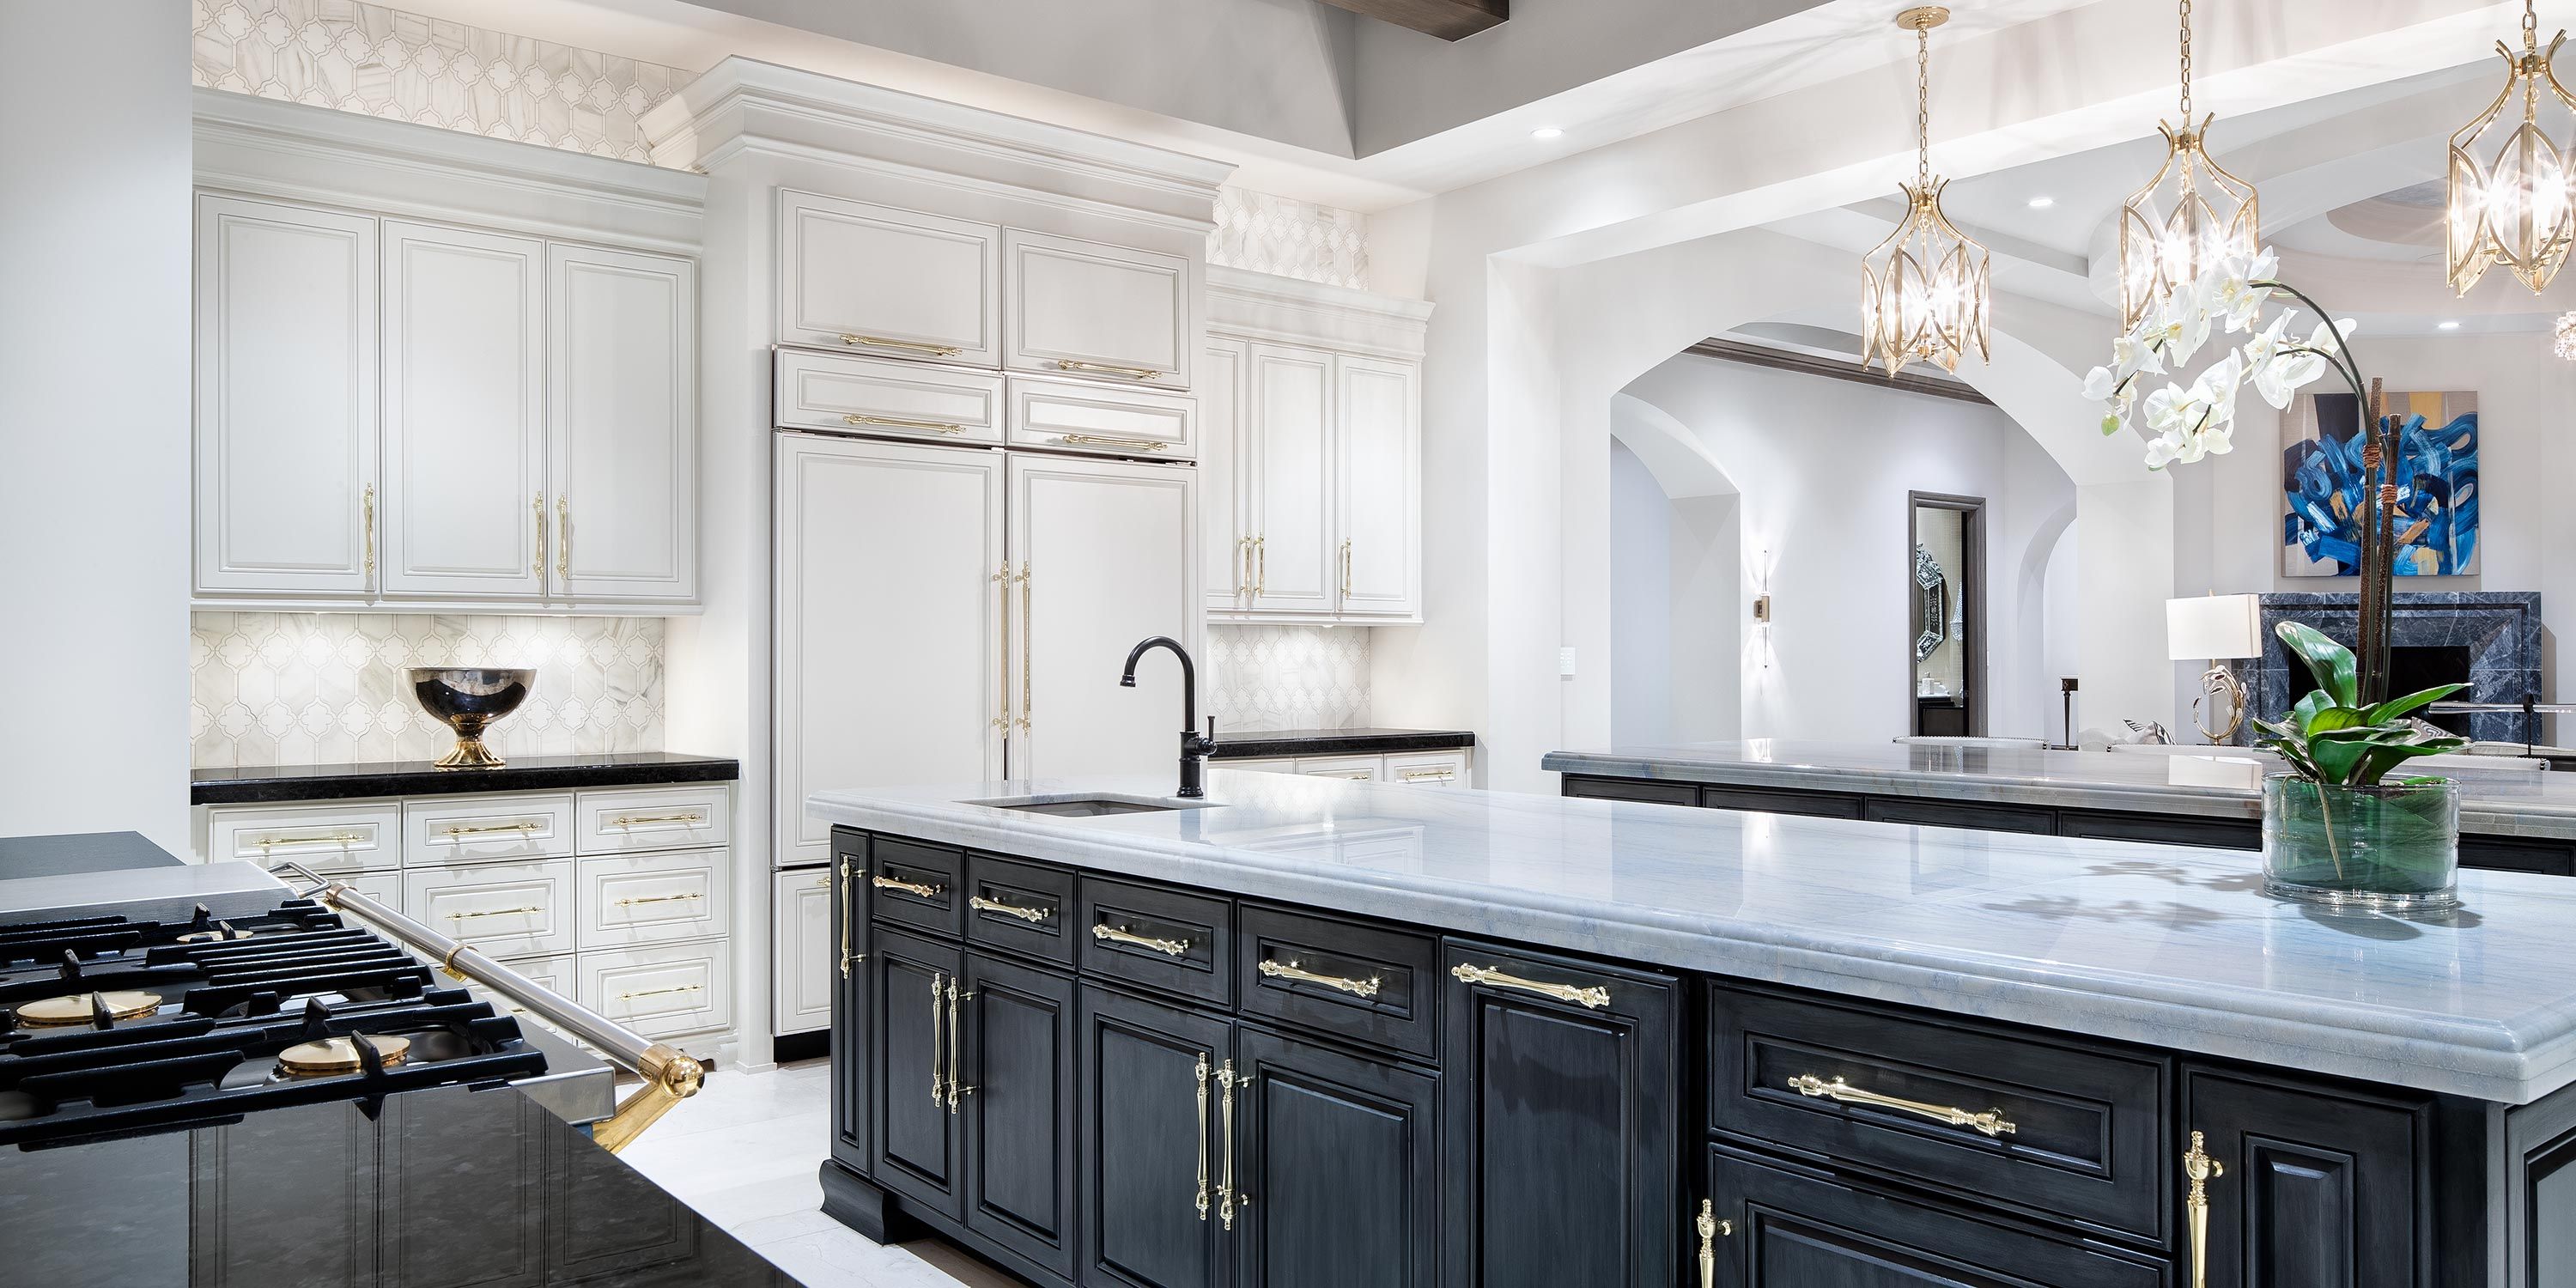 A luxurious kitchen with white cabinetry, a large island with dark cabinets, elegant gold hardware, and sophisticated lighting fixtures, featuring a modern and bright design.